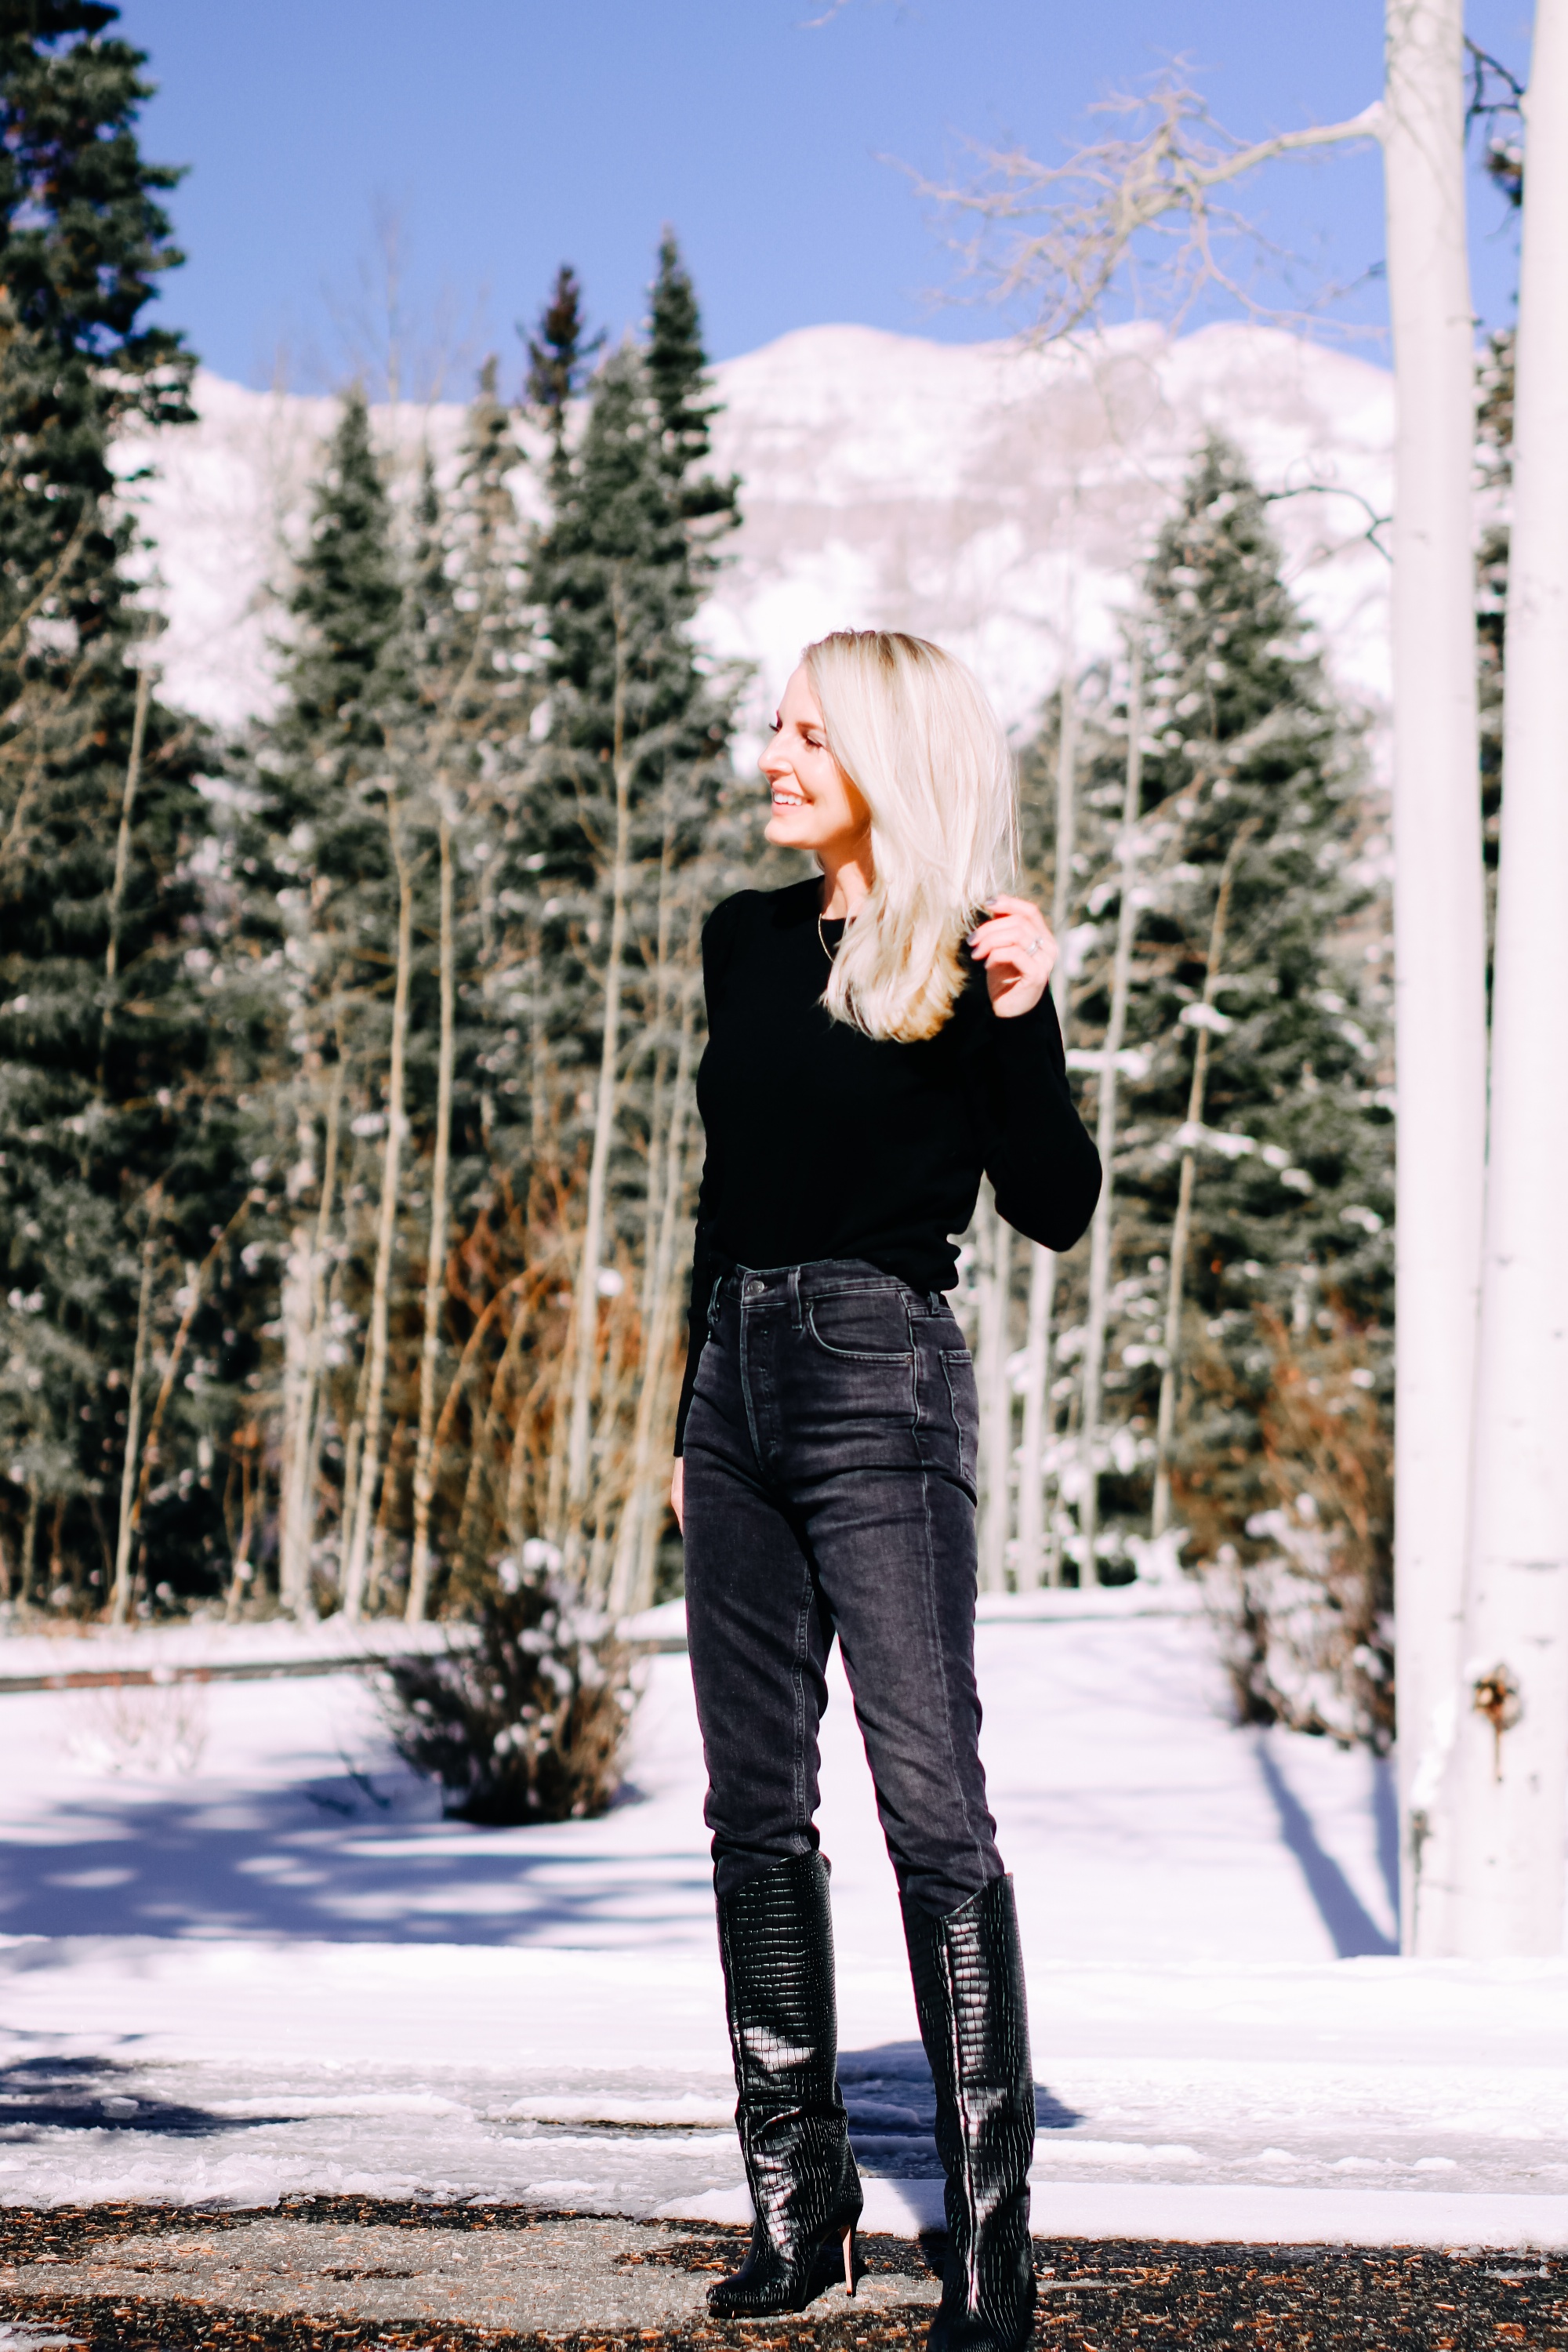 Thoughtful Gifts, Erin Busbee of Busbee Style wearing a black puff sleeve cashmere sweater by AQUA, gray wash Agolde jeans, black Sorel boots, and a diamond star necklace by Marc & Marcella from Bloomingdale's in Telluride, Colorado